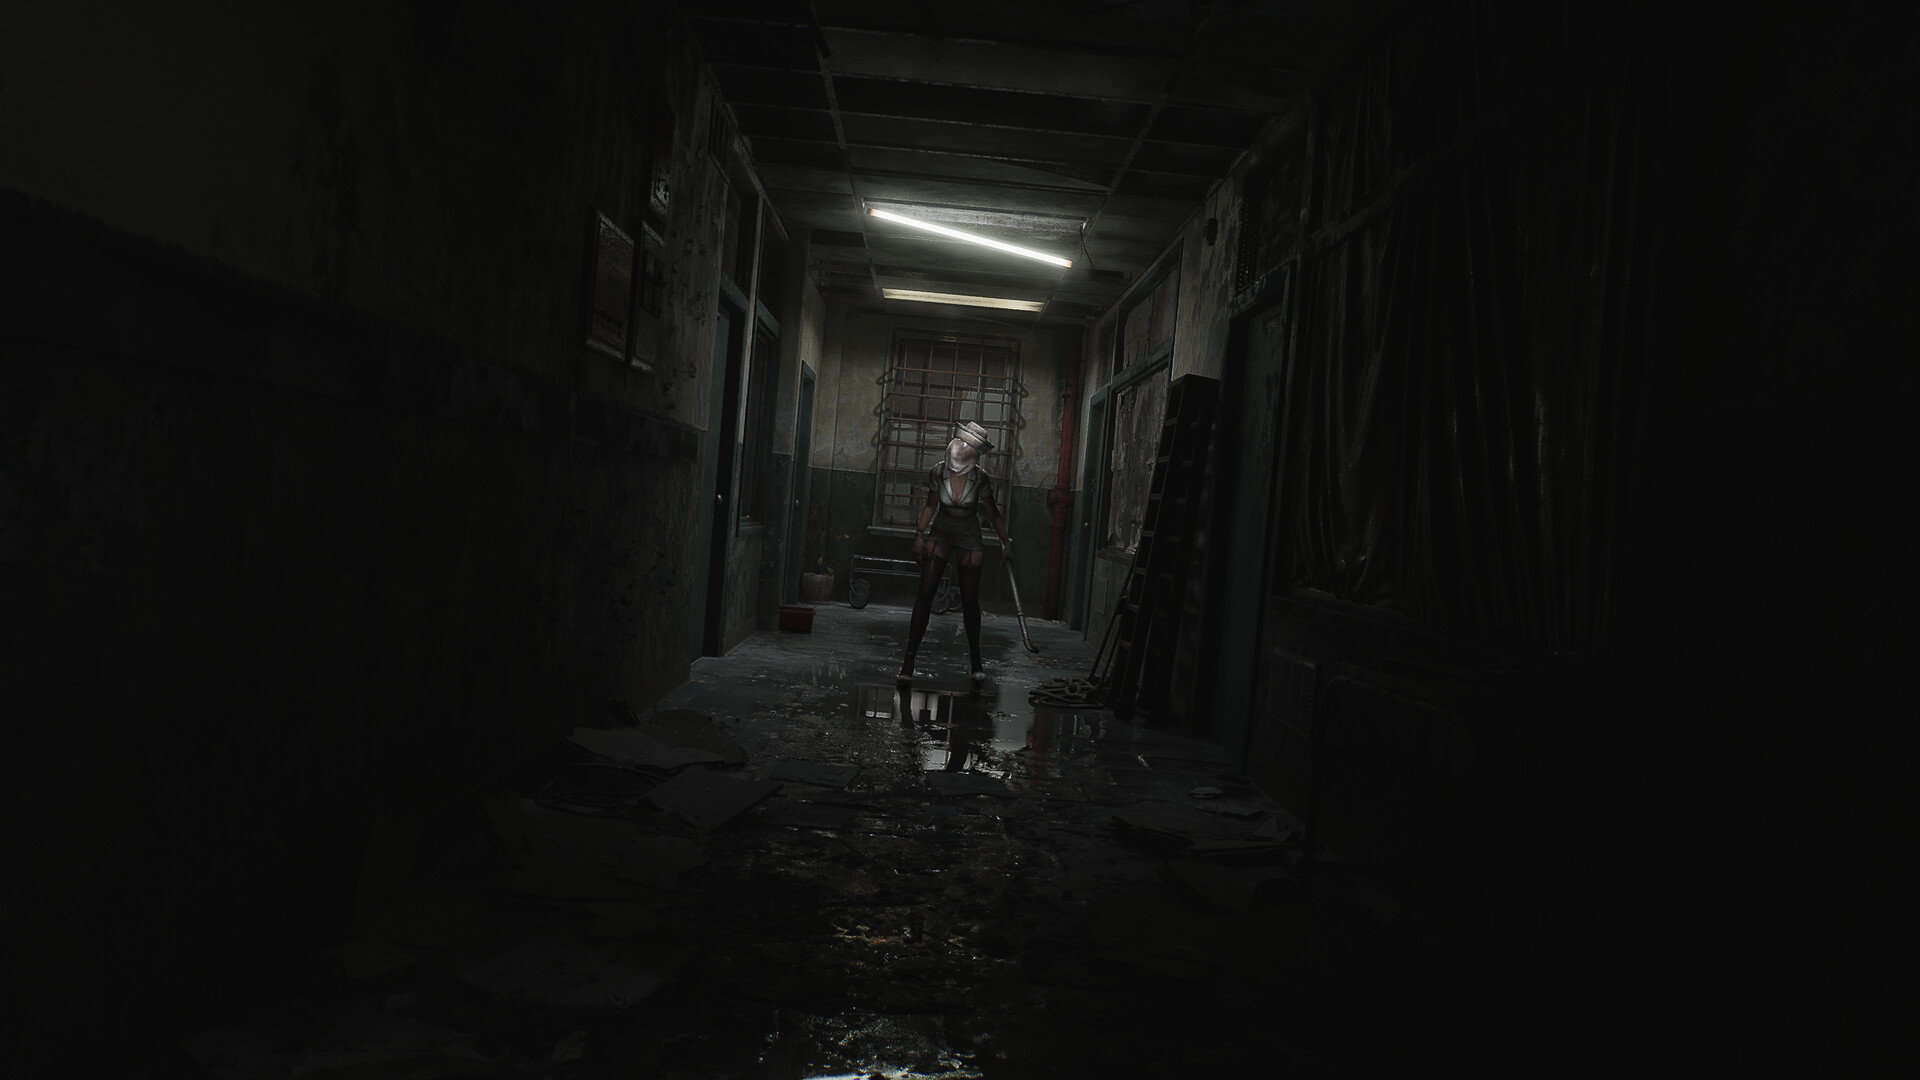 Silent Hill f is the Next Mainline Entry in the Horror Franchise